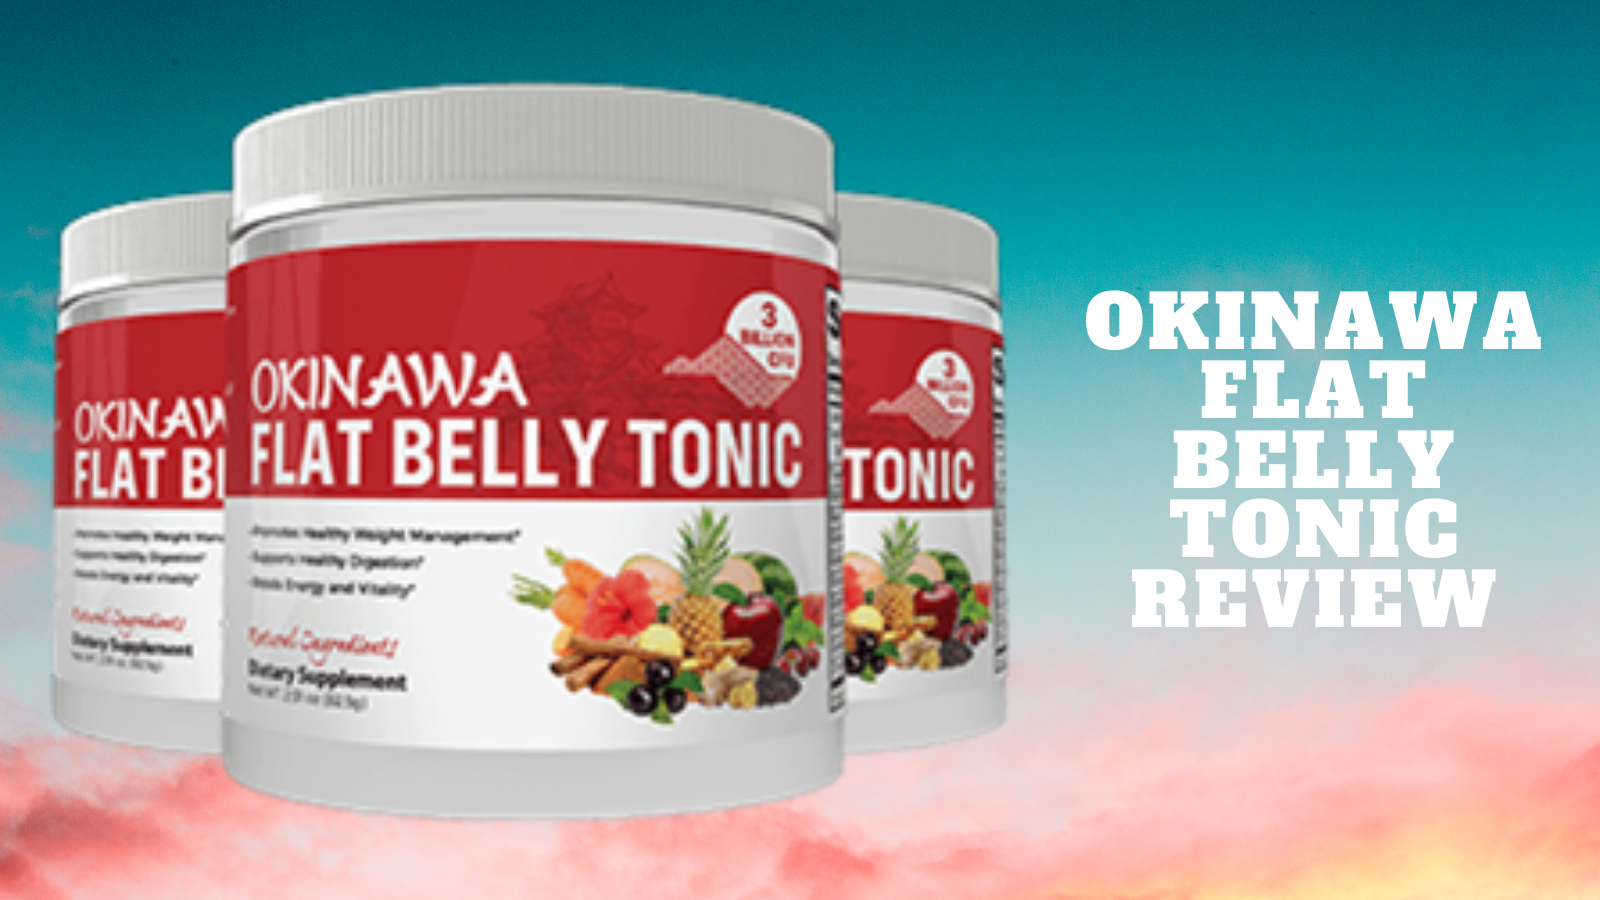 Are flat belly tonic reviews reliable?